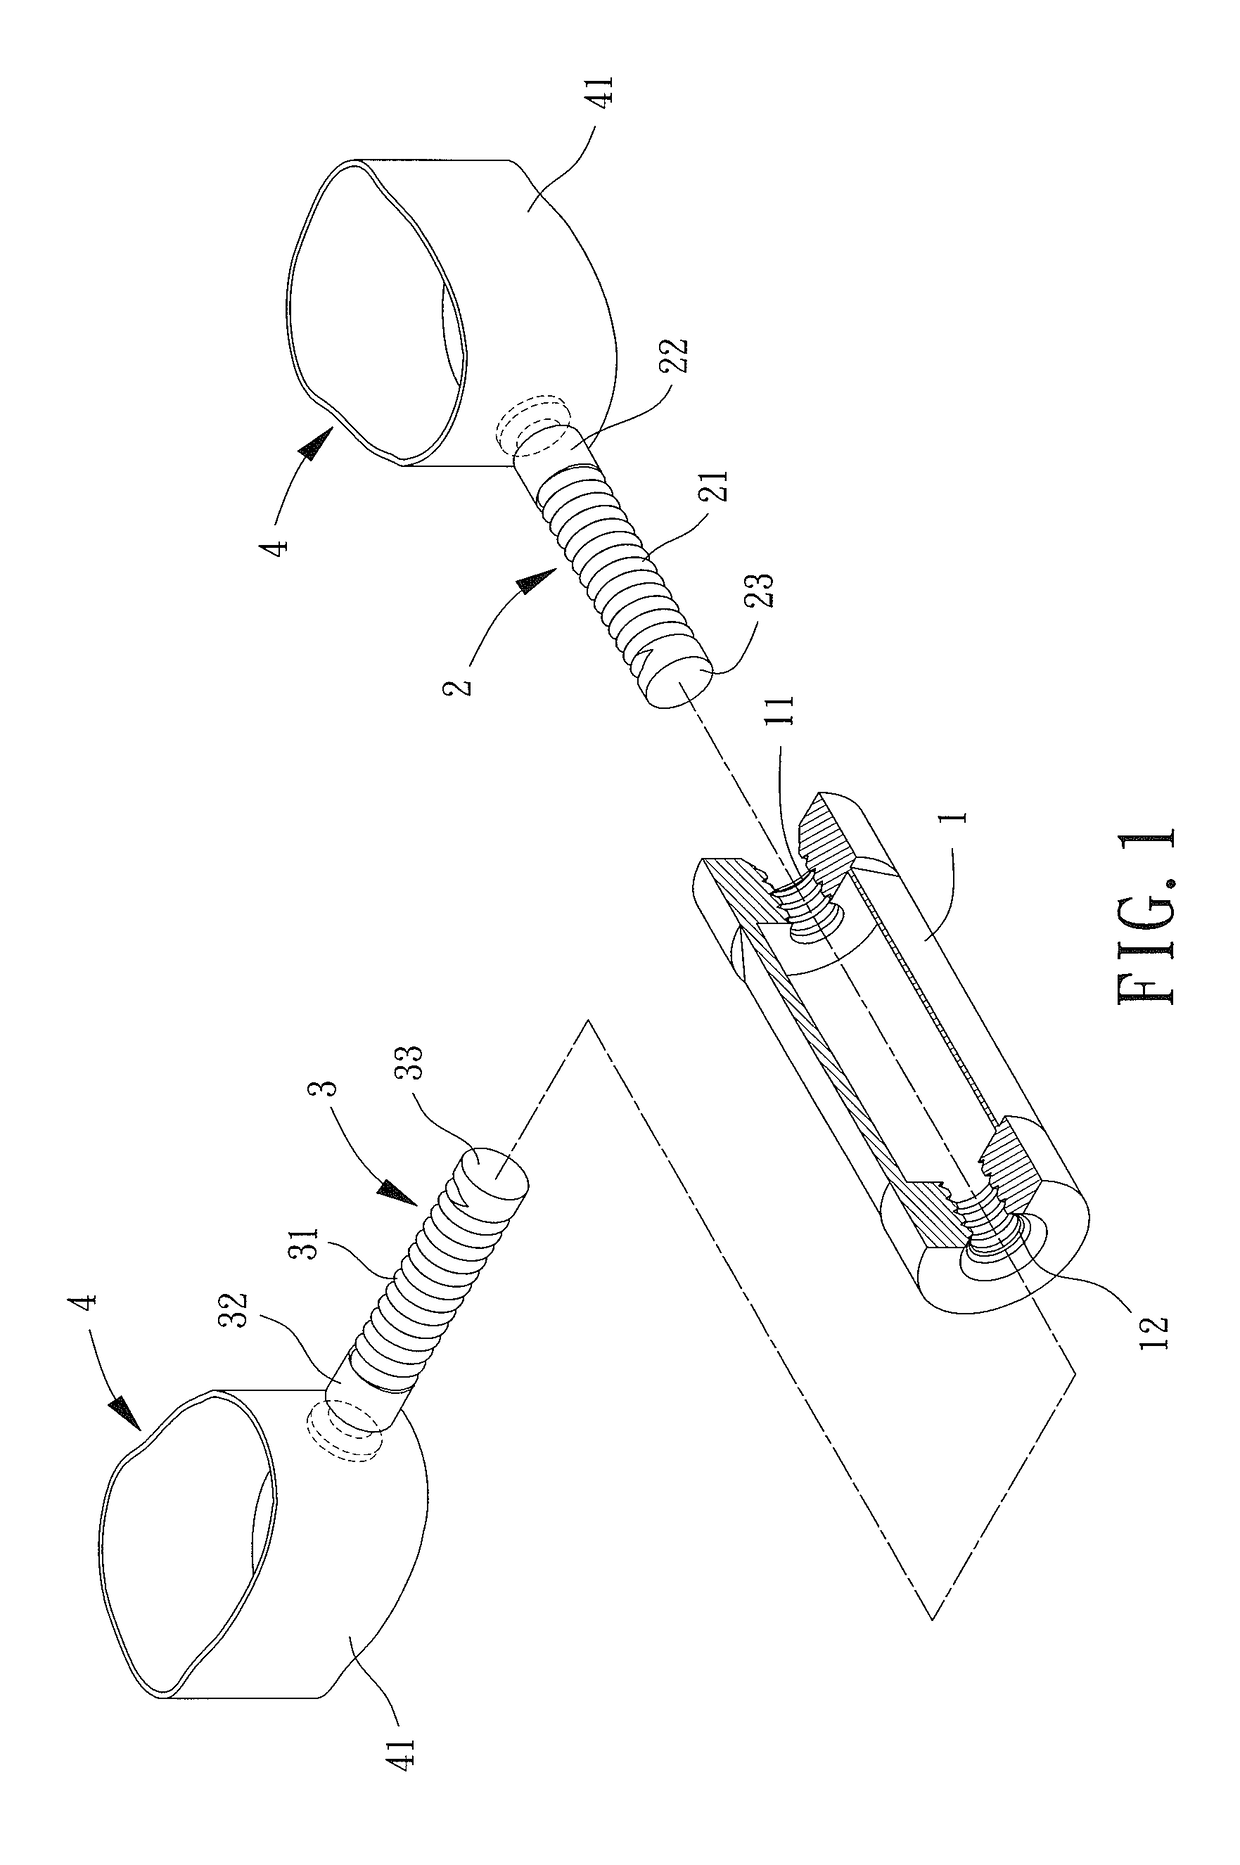 Orthodontic remodeling device